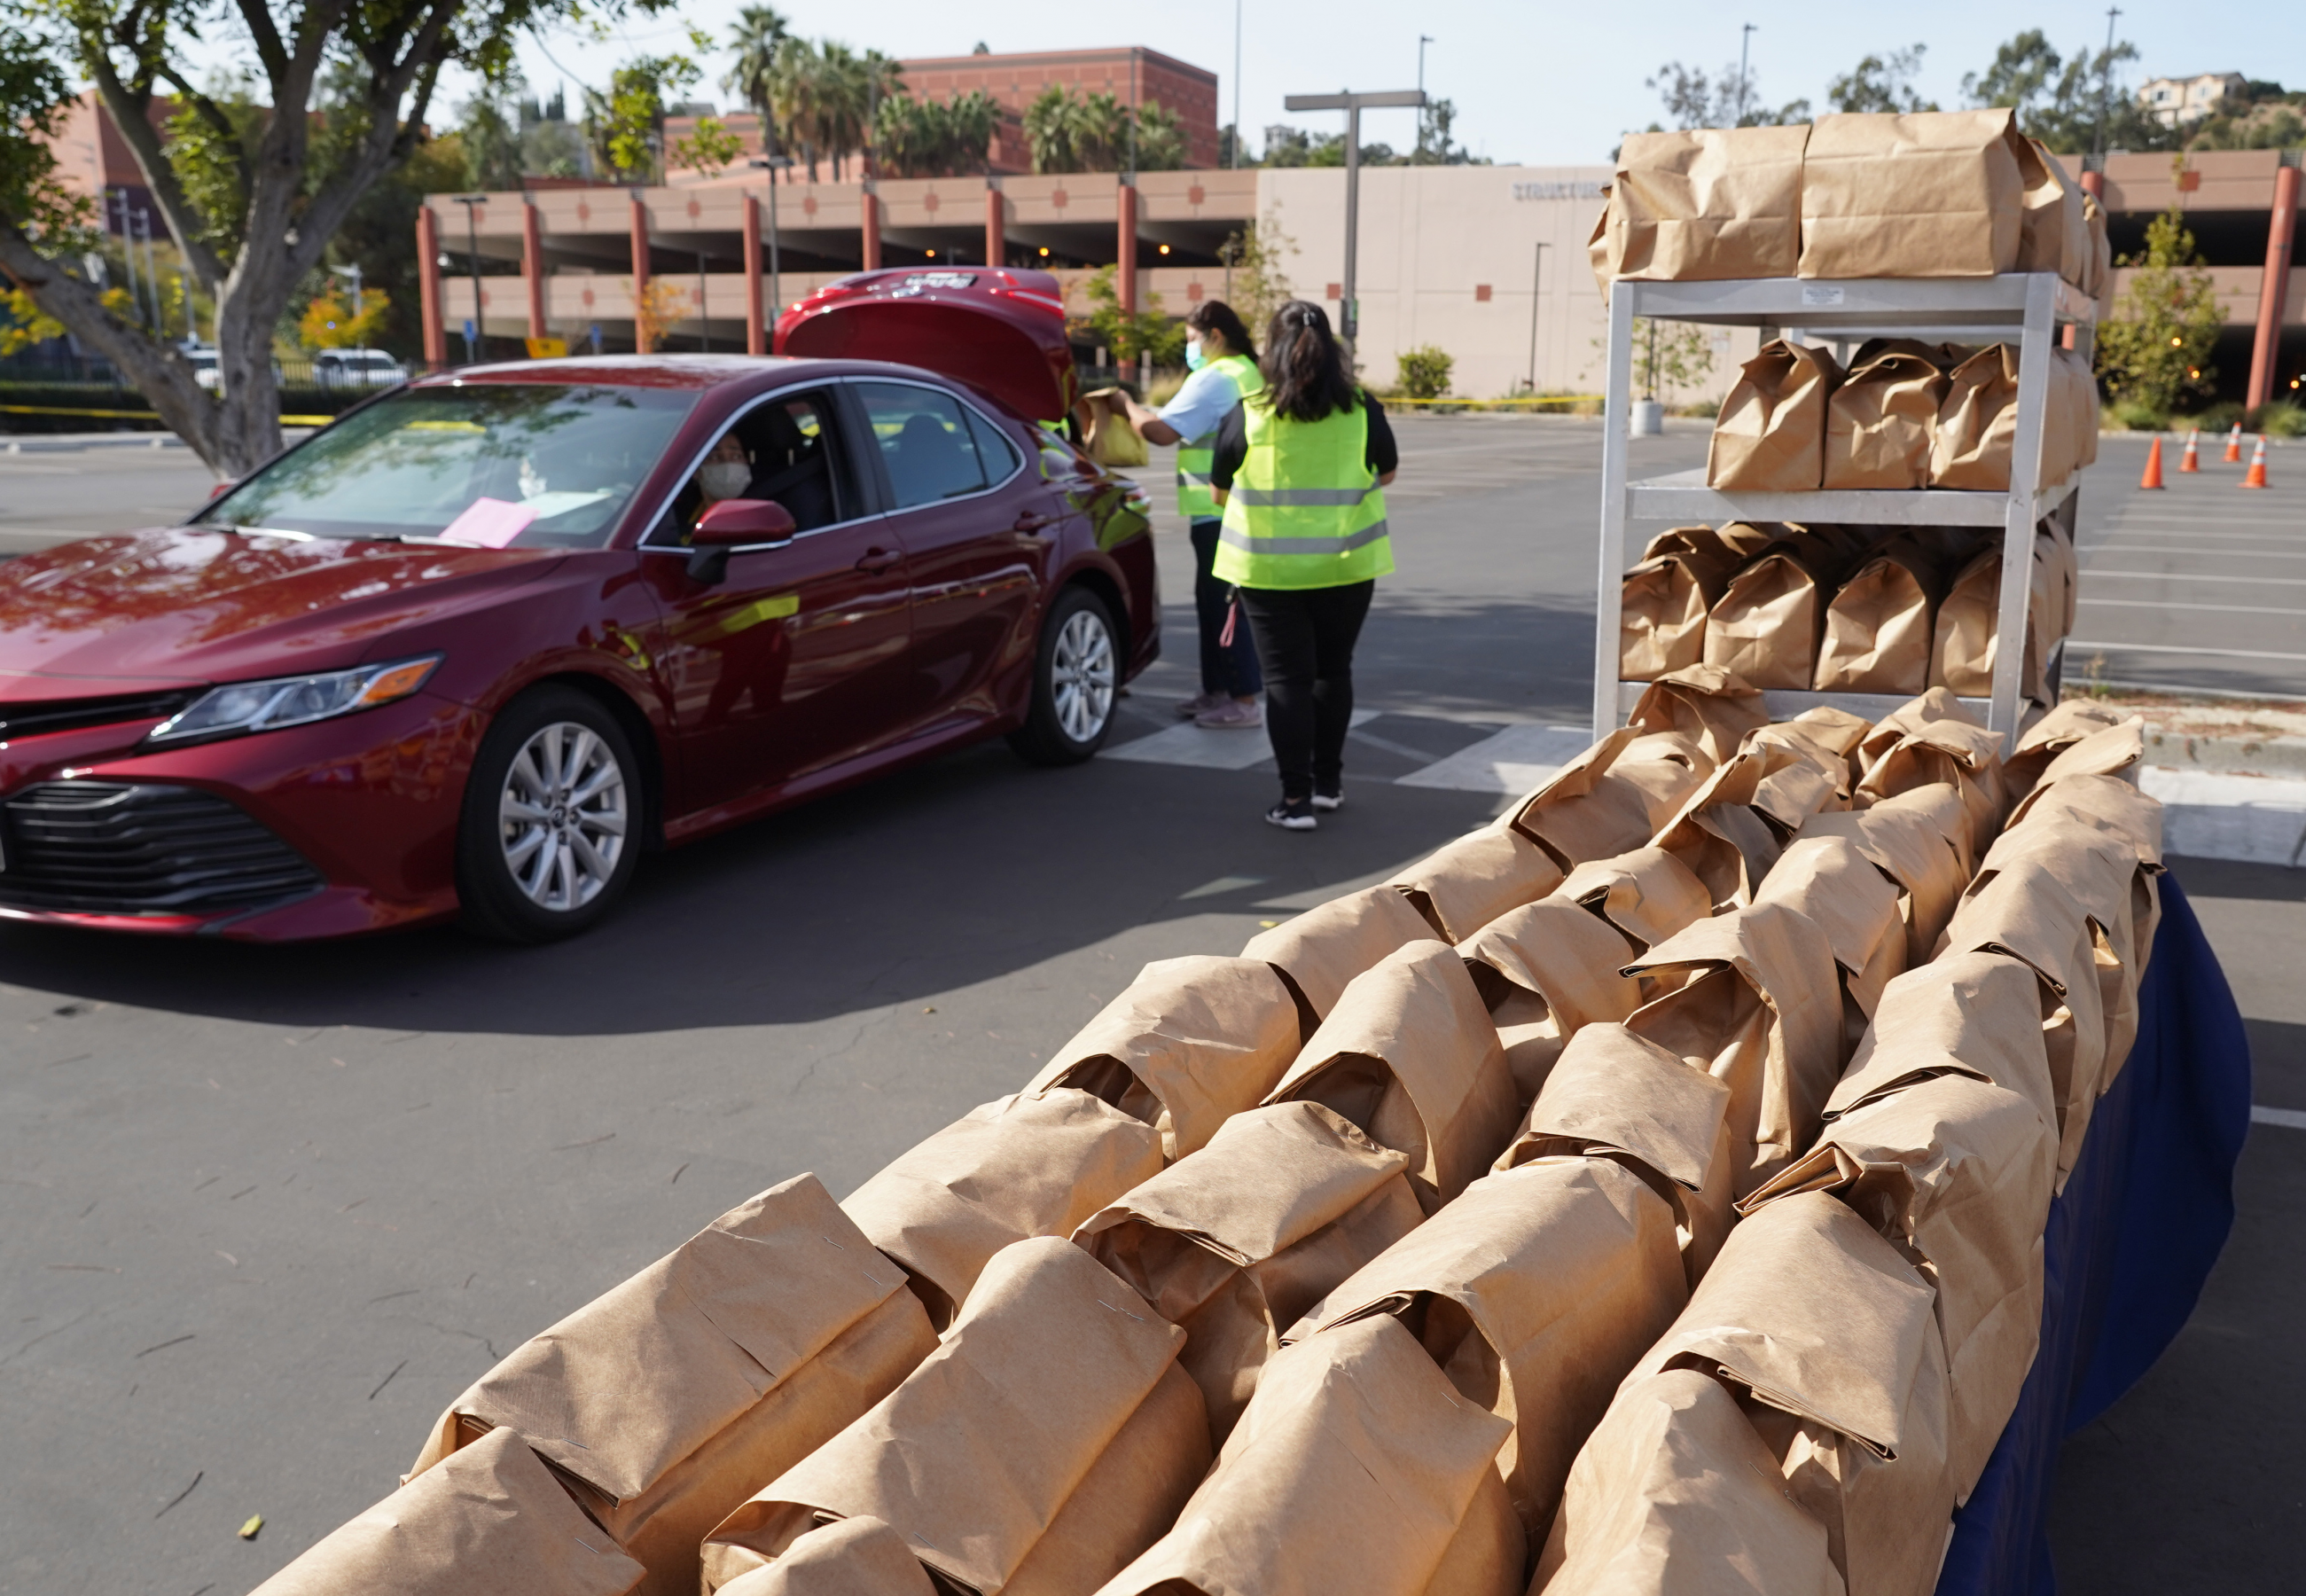 Volunteers load grocery bags into a car